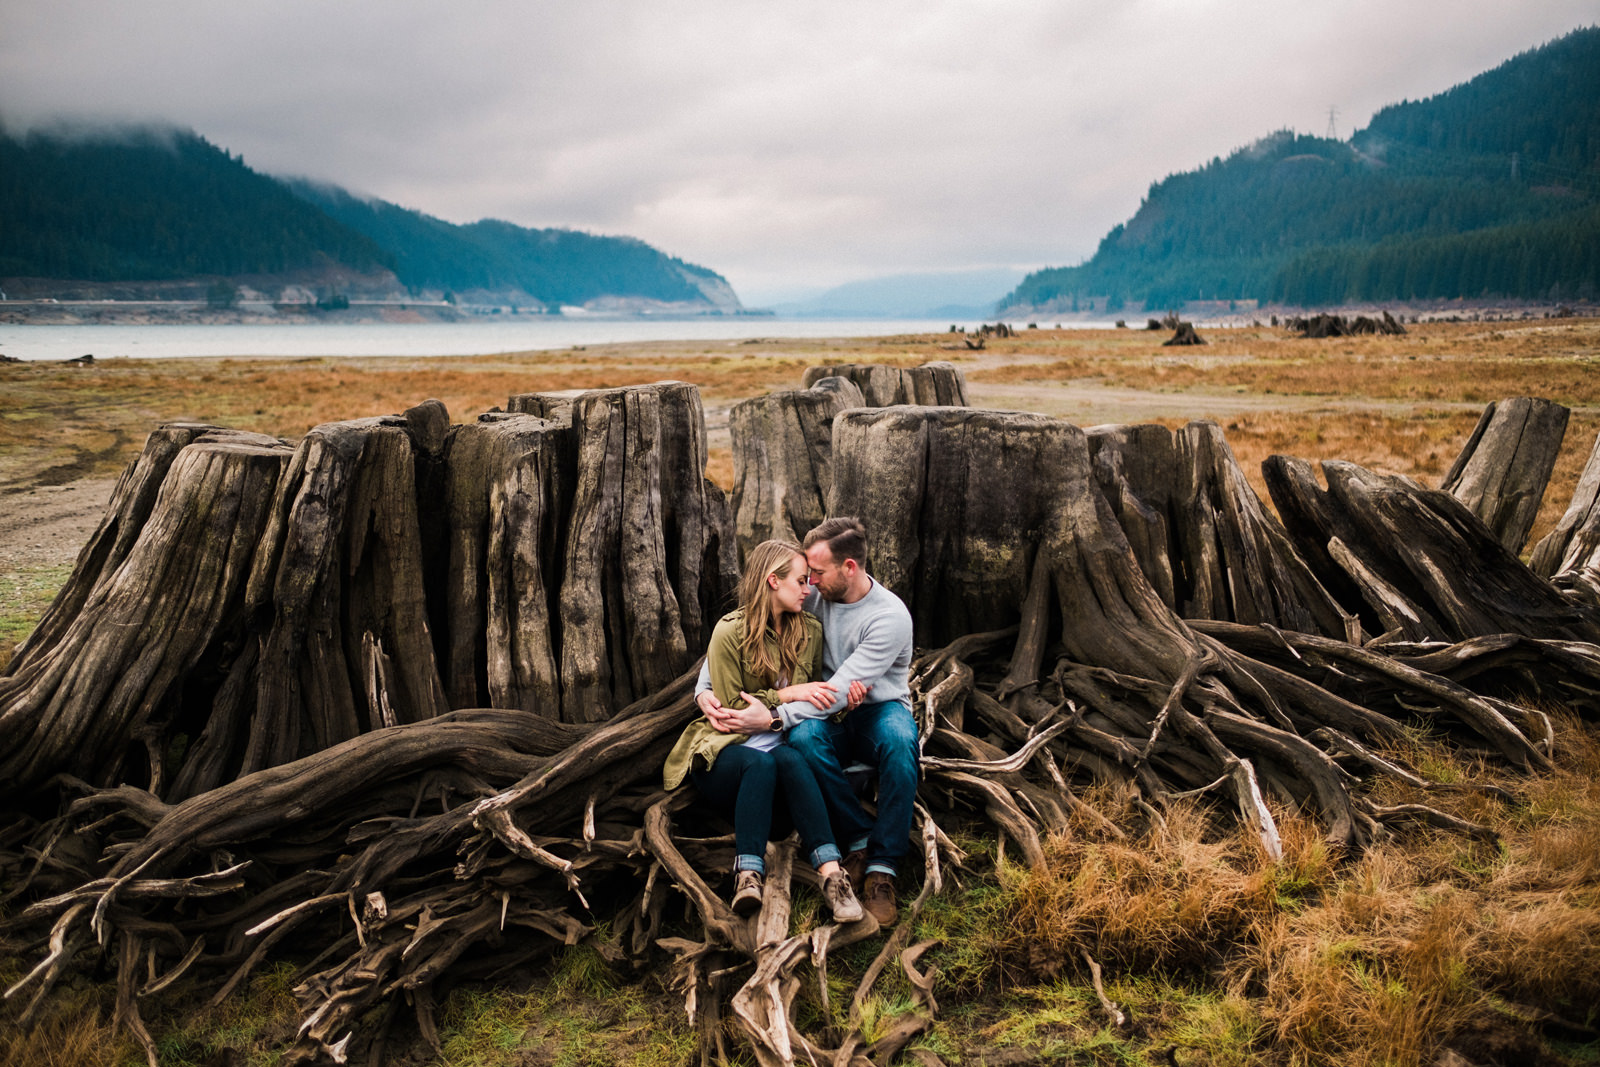 098-snoqualmie-pass-engagement-photo-with-tree-stumps-and-mountain-lakes.jpg